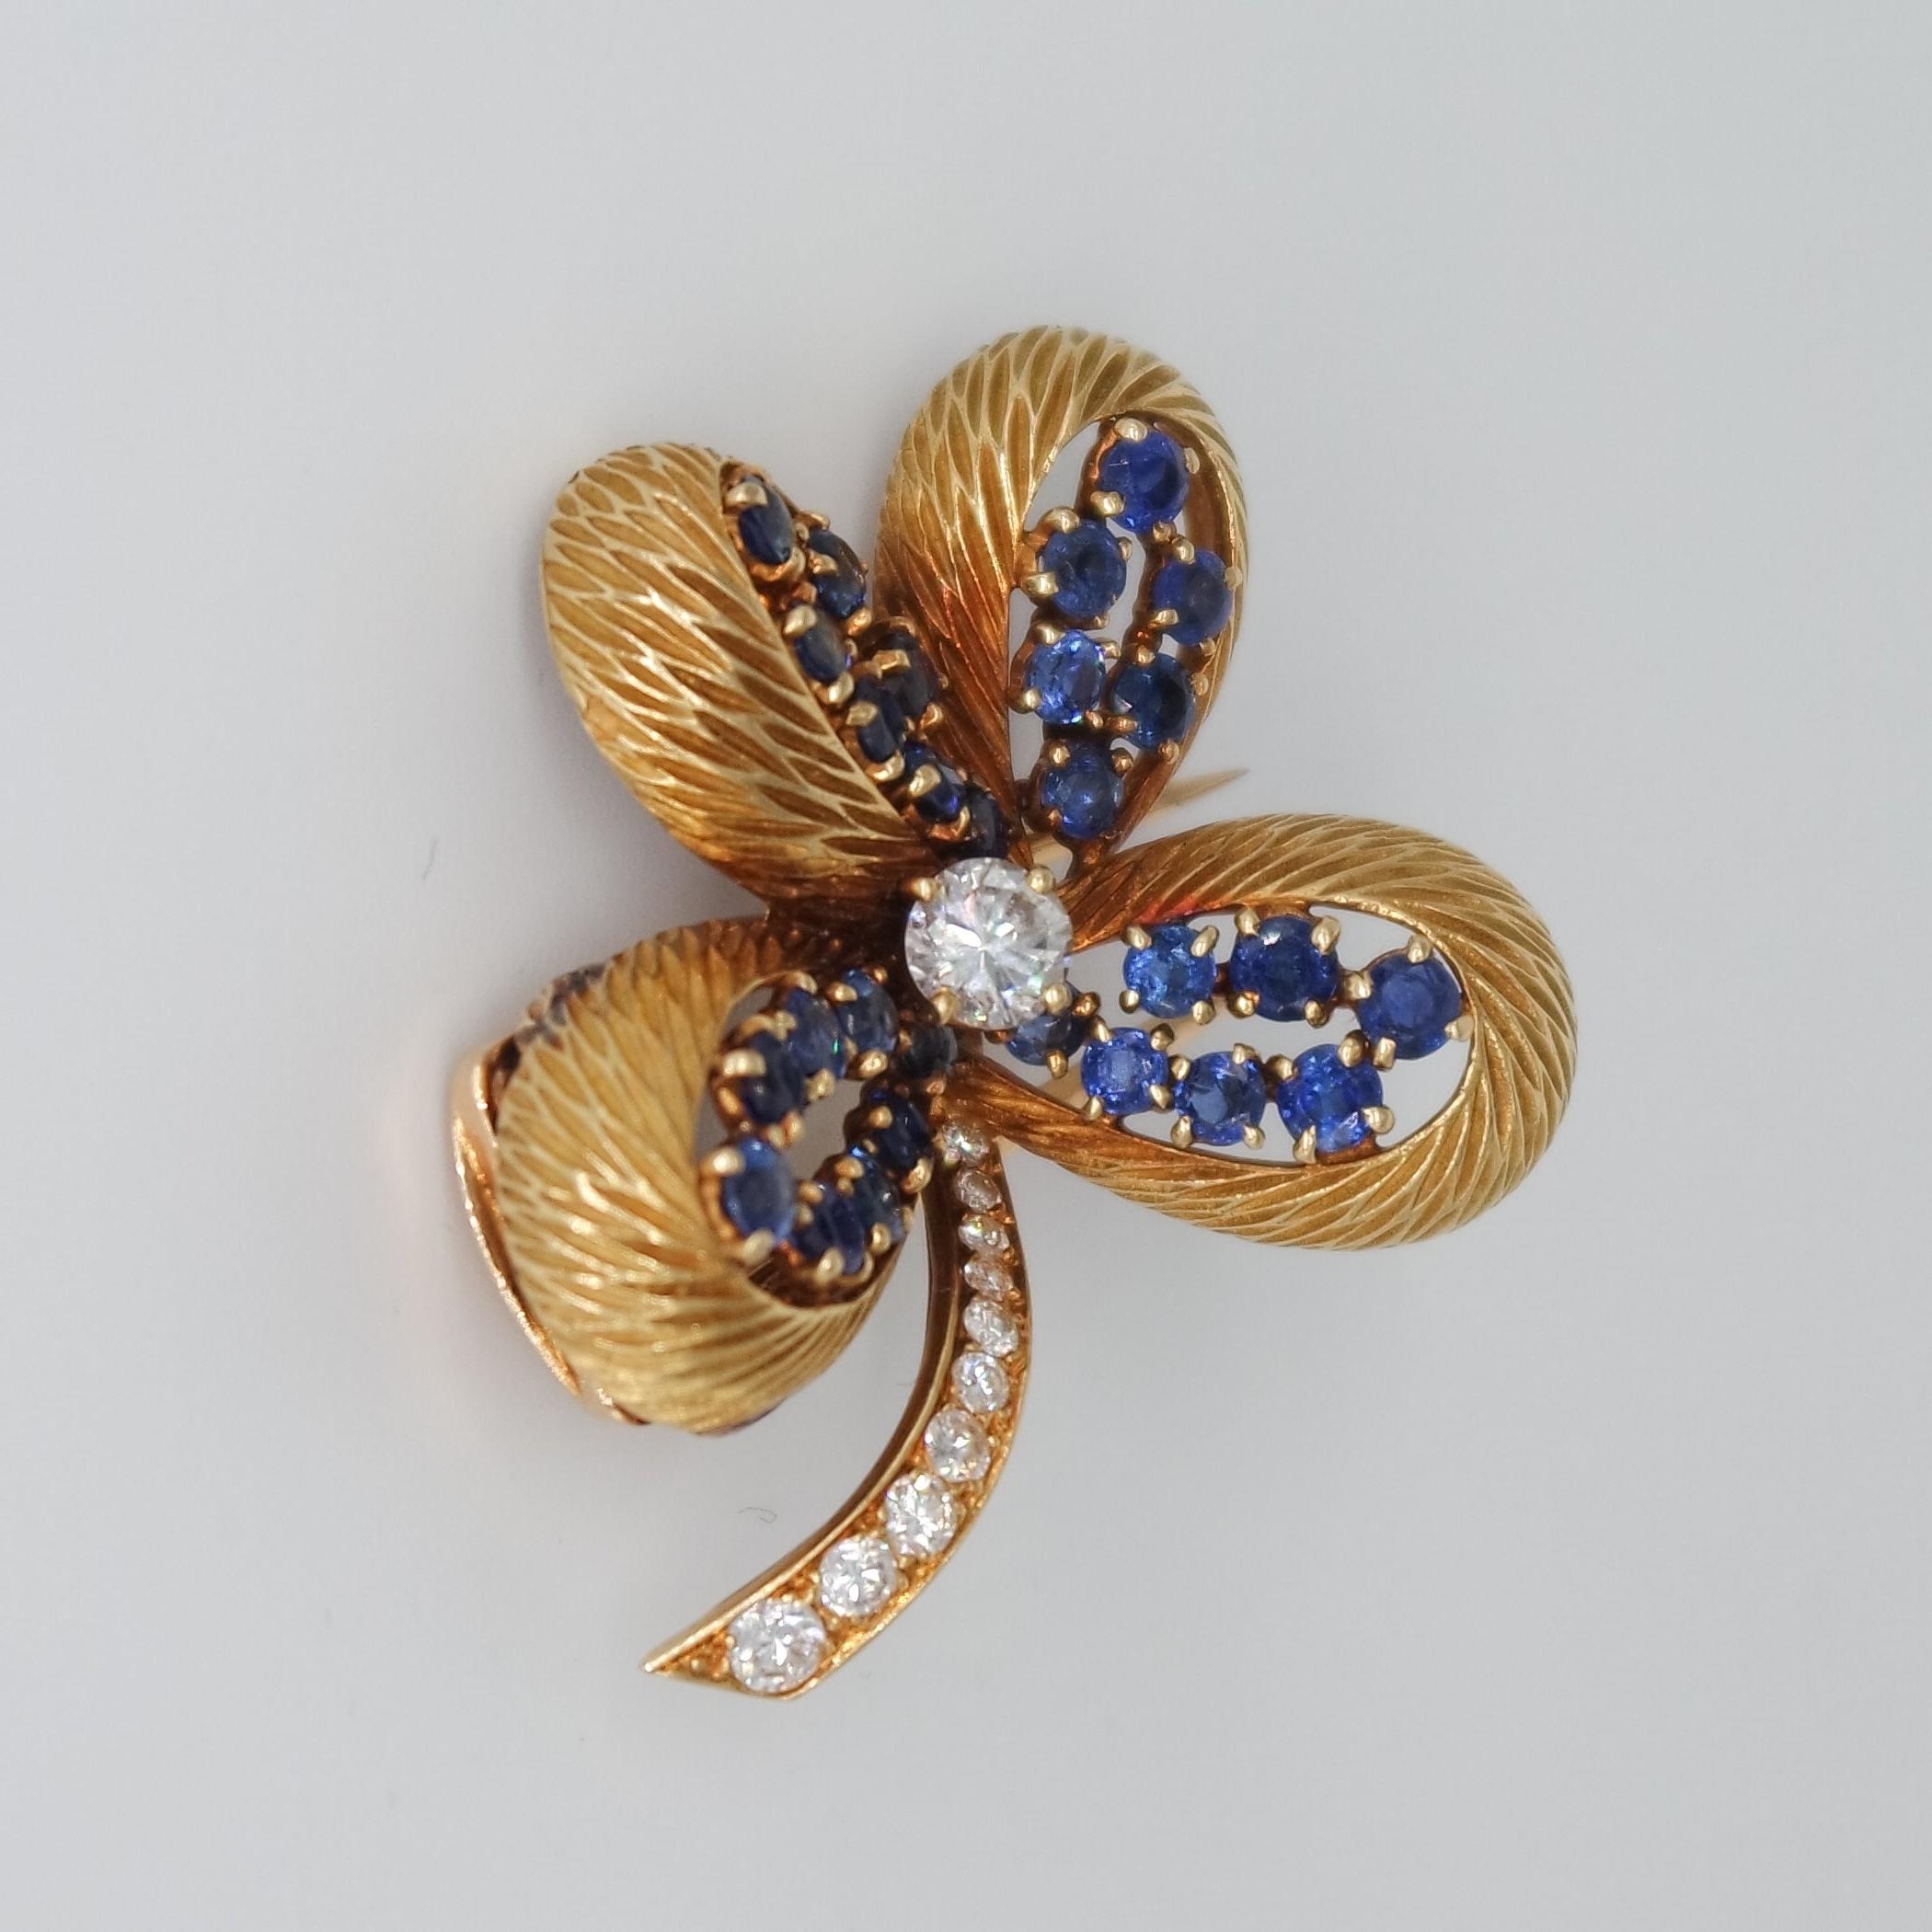 This four-leaf clover brooch by Cartier has become a classic design developed in many different versions by the Parisian Maison. 
It is also an exquisite lucky symbol to pin on your favorite jacket. 
This one, in 18 karat yellow gold, diamonds and